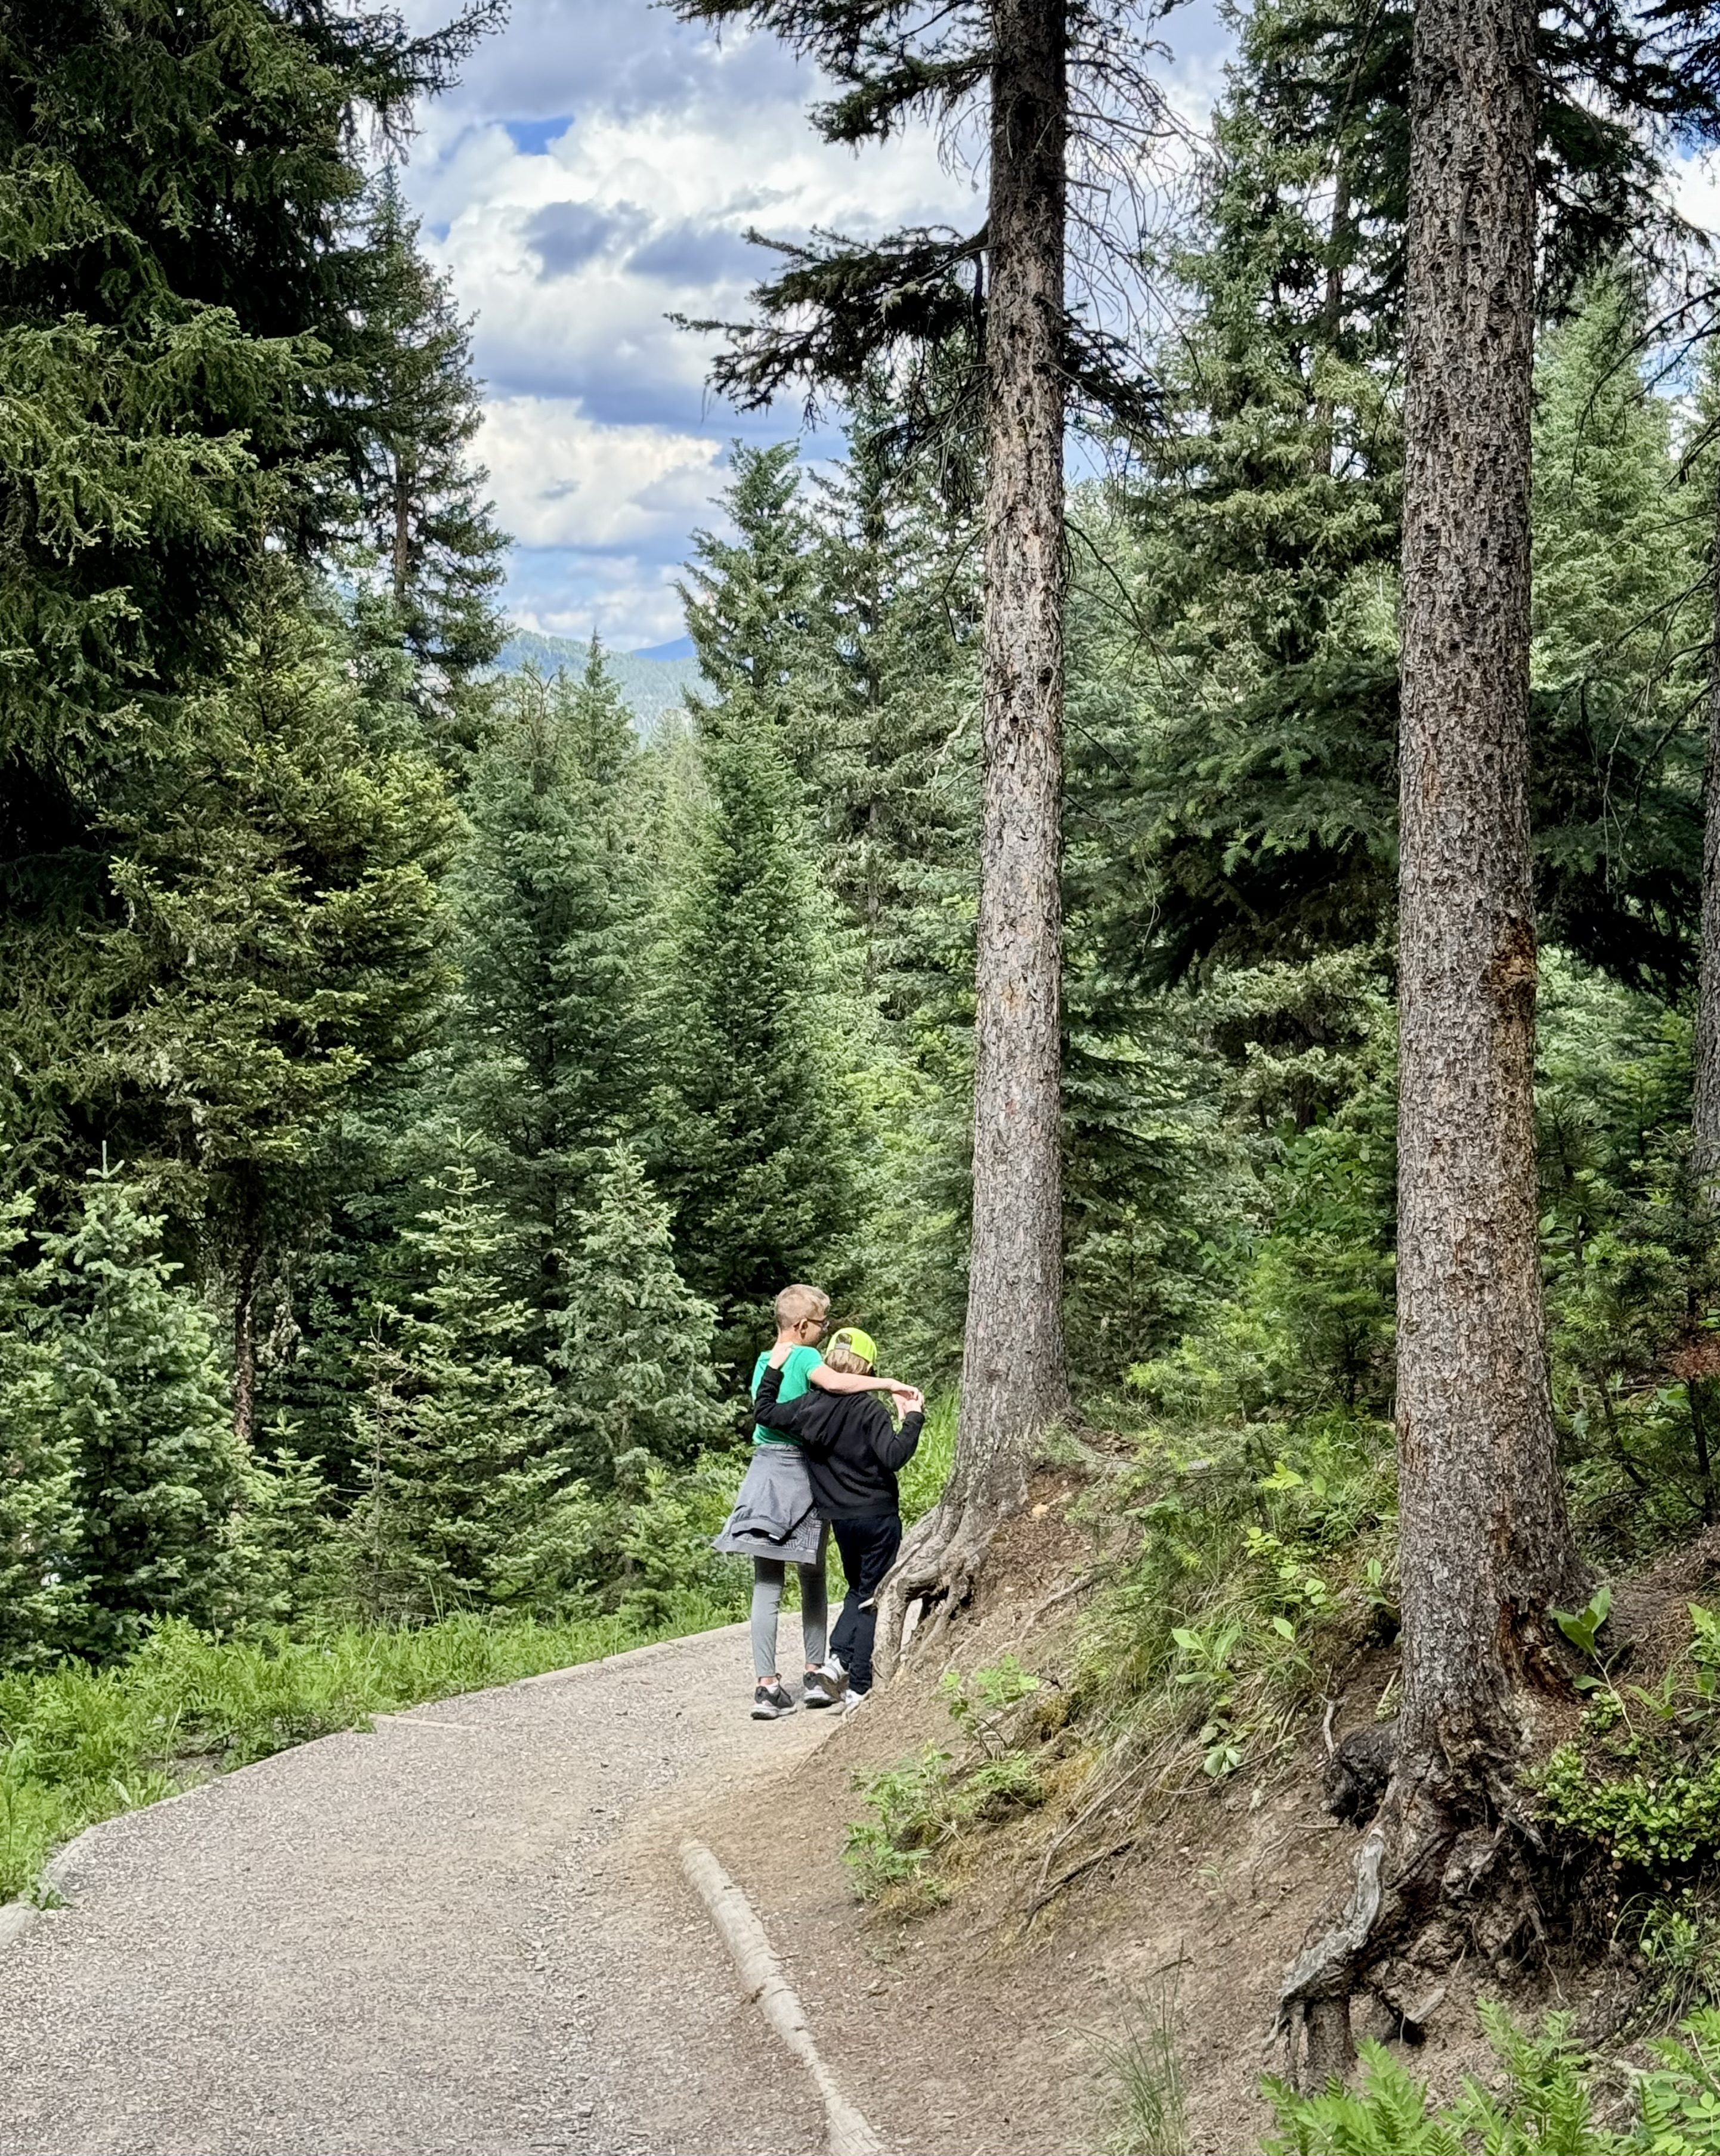 Image of two boys with their arms around one another on a hiking trail